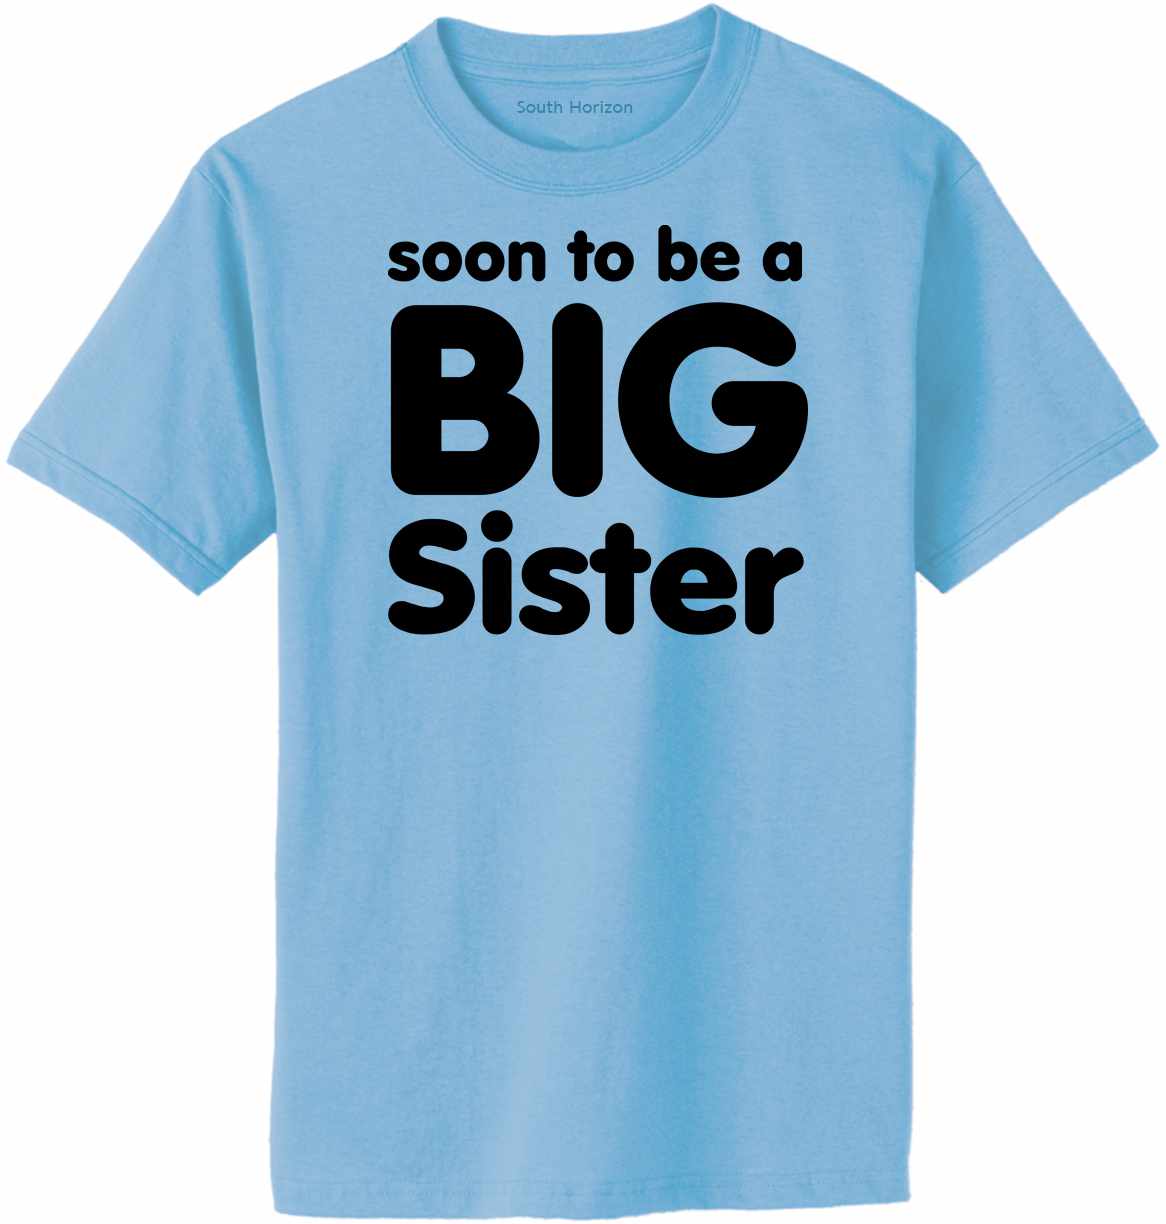 Soon to be a BIG SISTER Adult T-Shirt